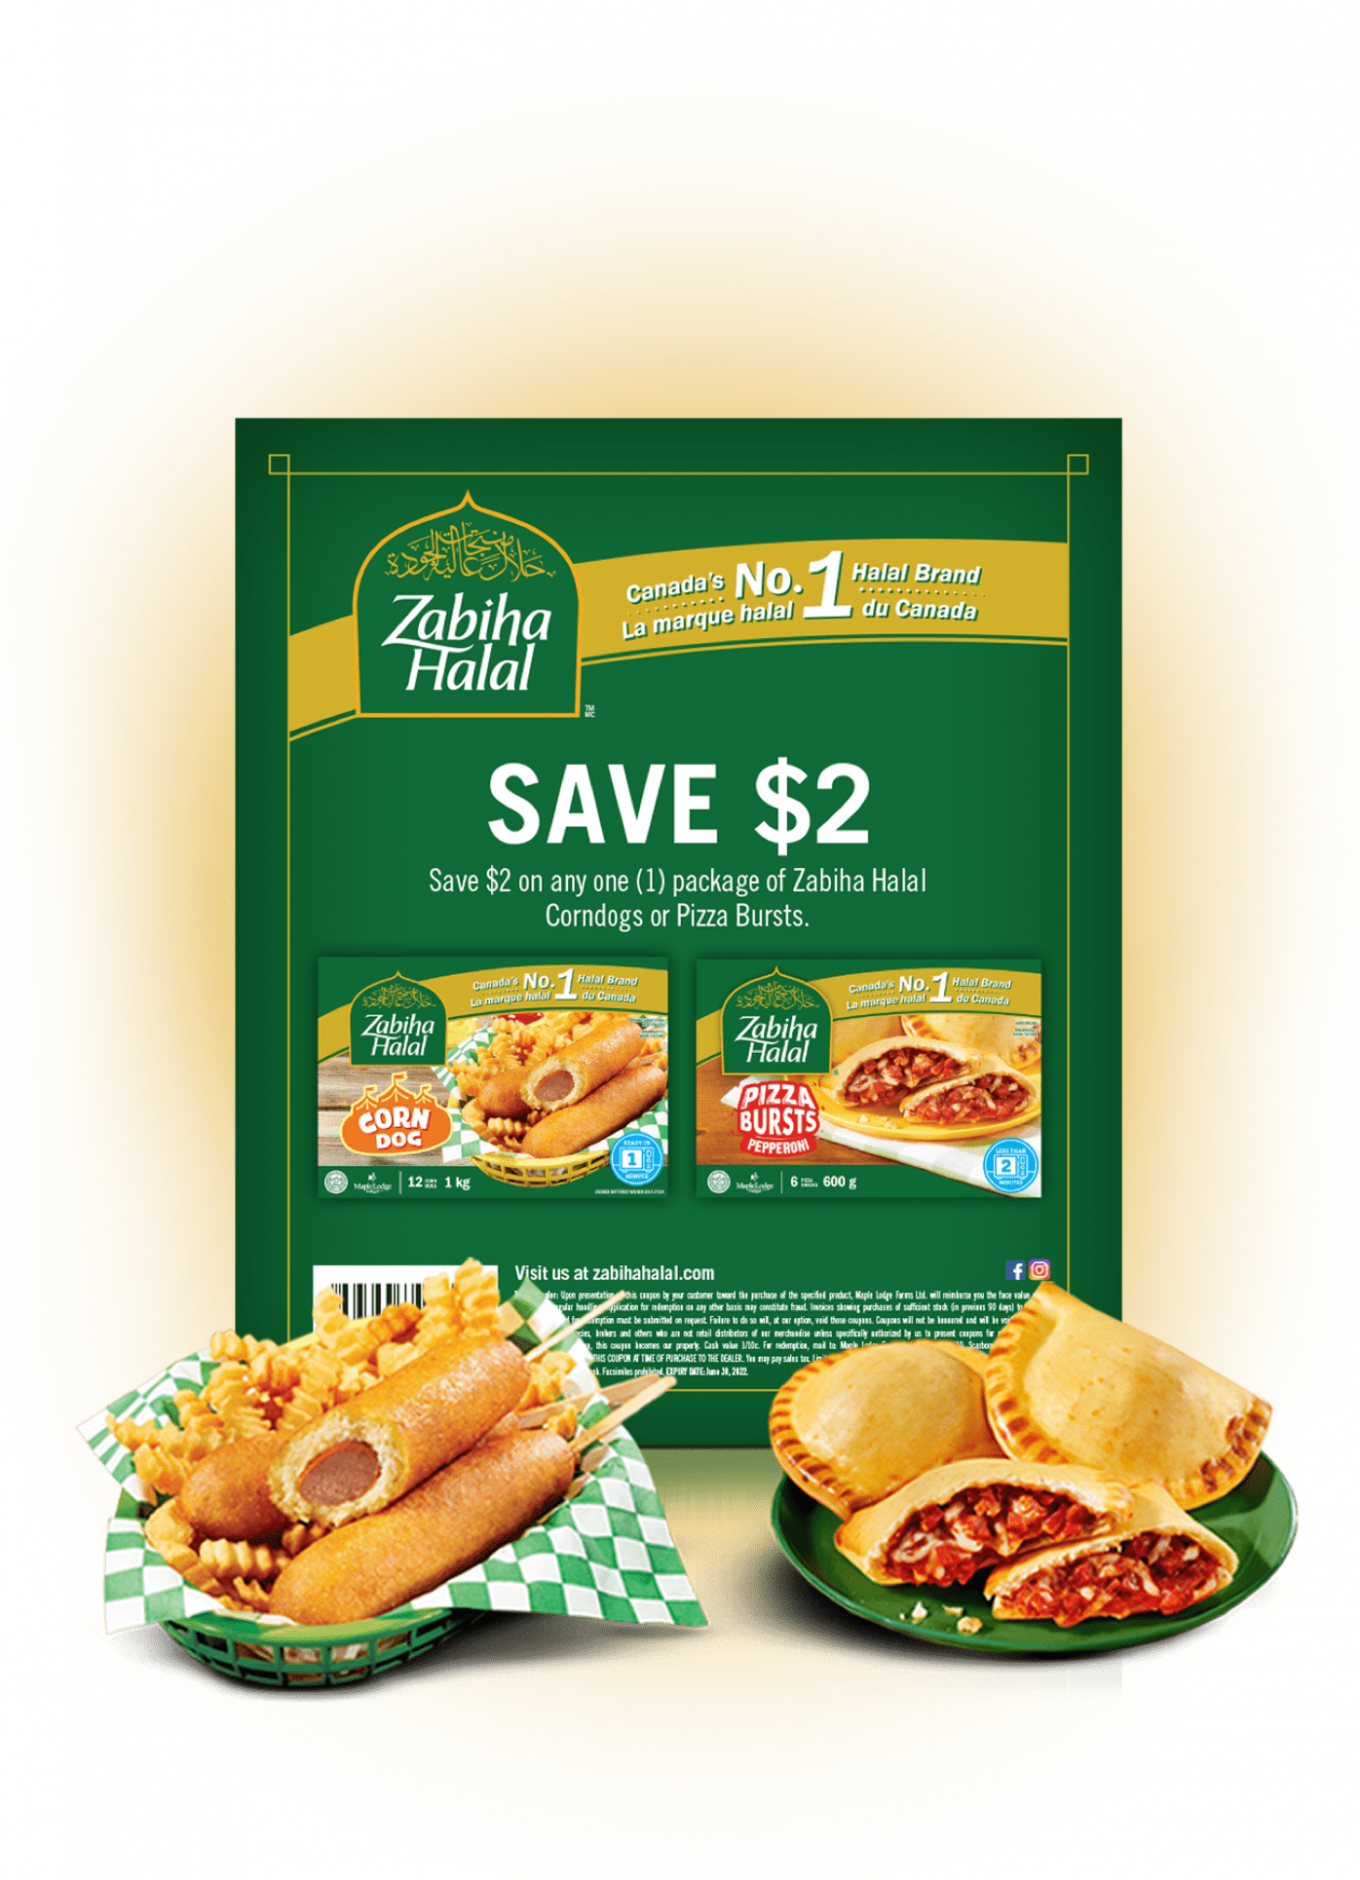 Save $2 on 1 package of our Halal Pizza Bursts or Corn Dogs.